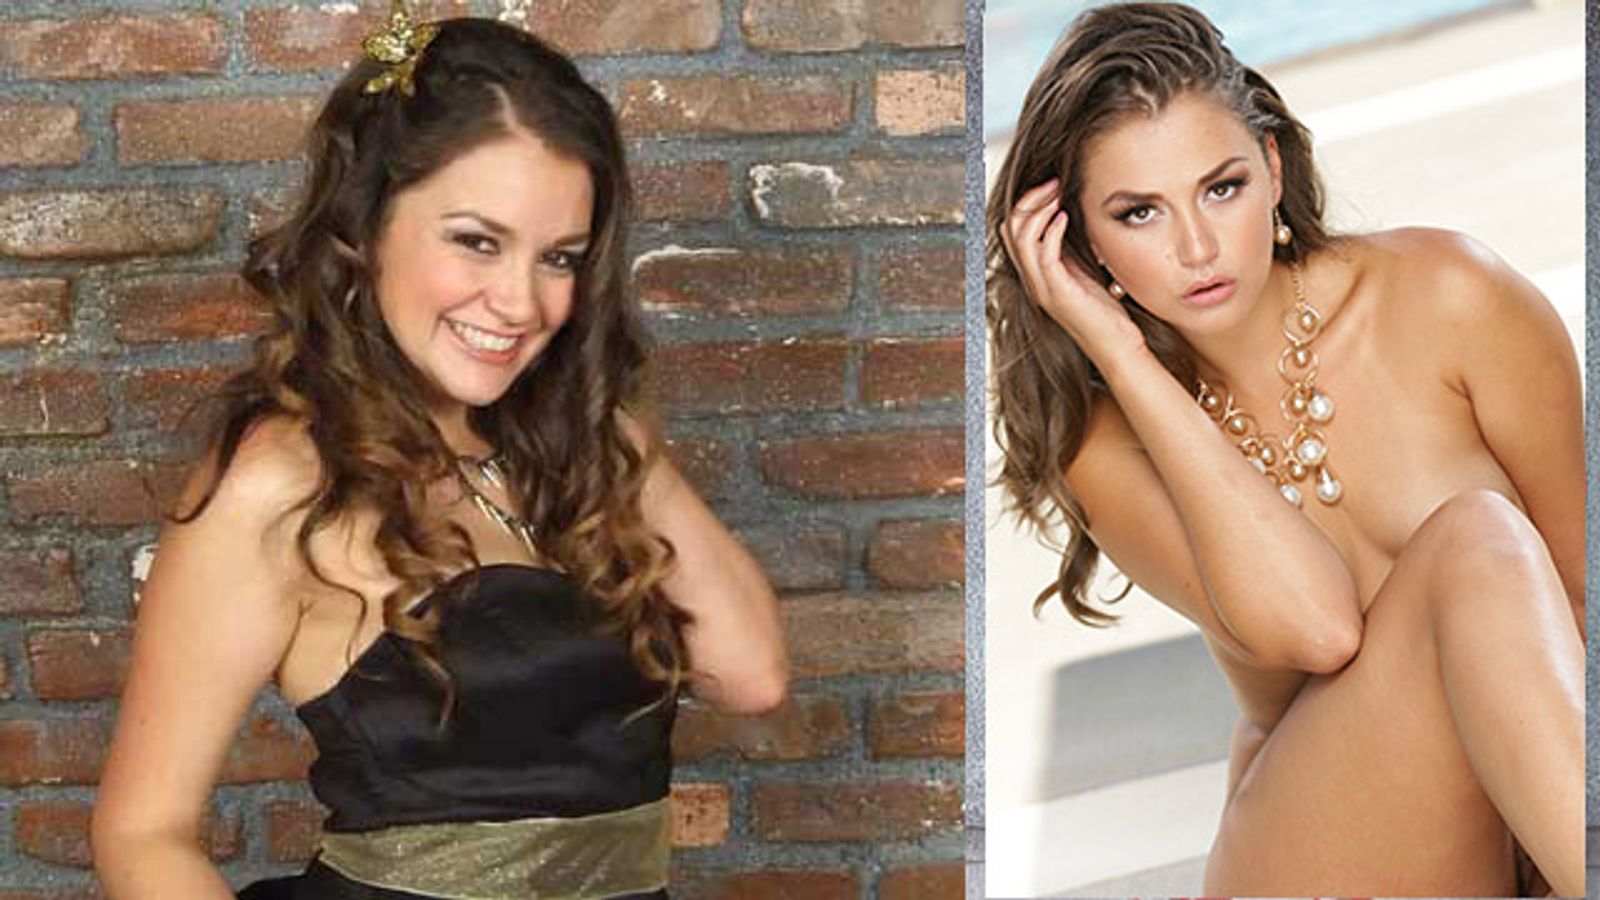 Allie Haze at AEE: Signing, Hosting, Featuring, Partying, Interviewing